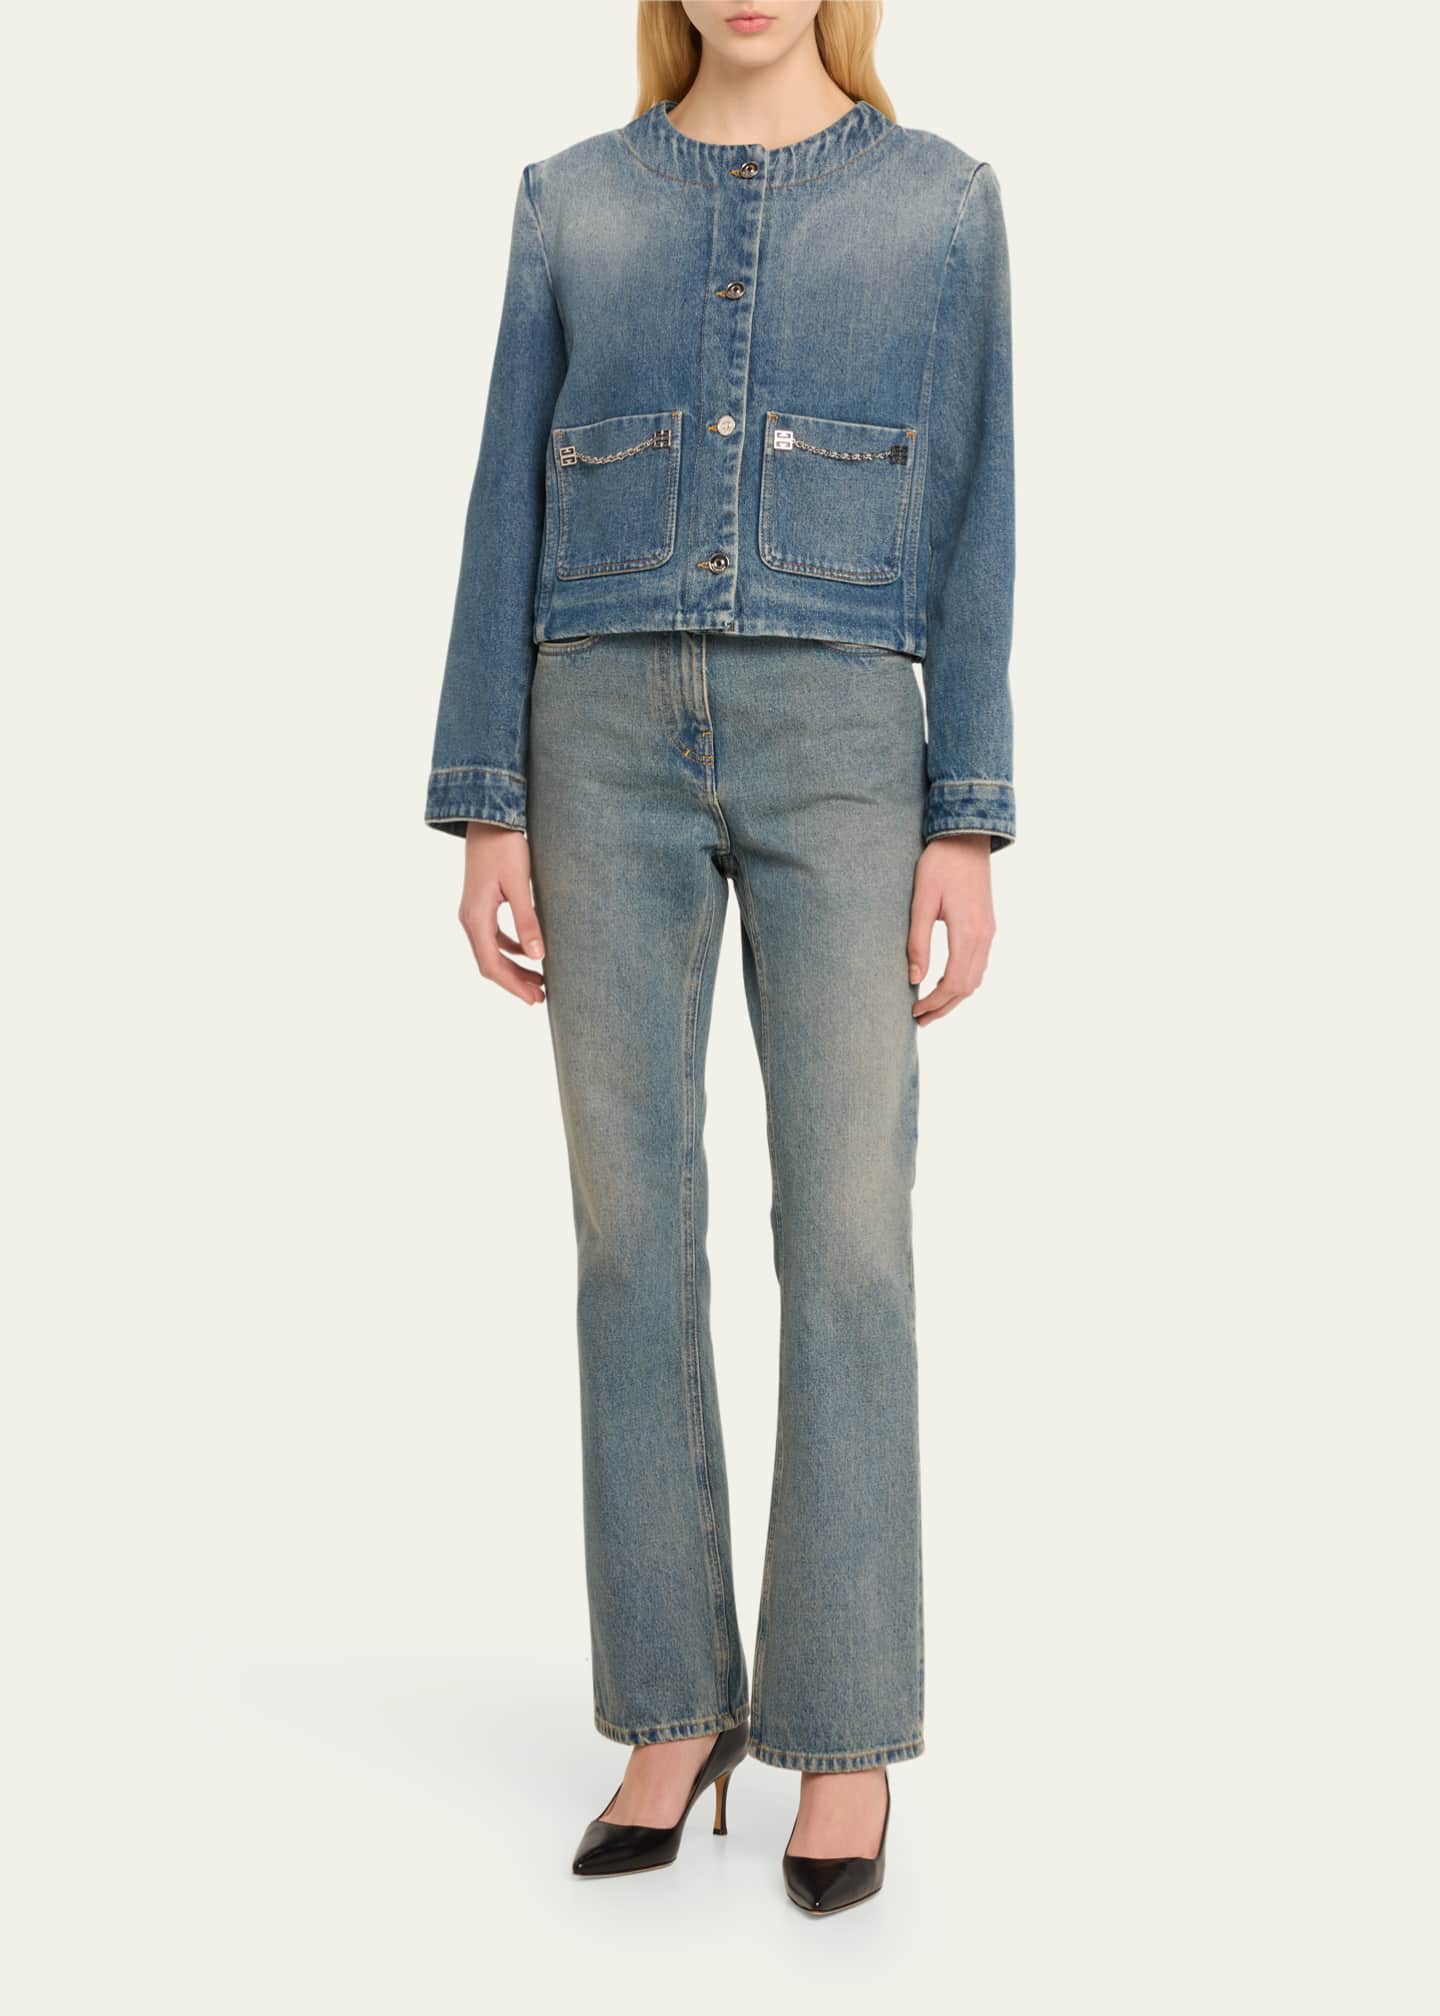 Givenchy Jean Jacket with 4G Chain Detail - Bergdorf Goodman